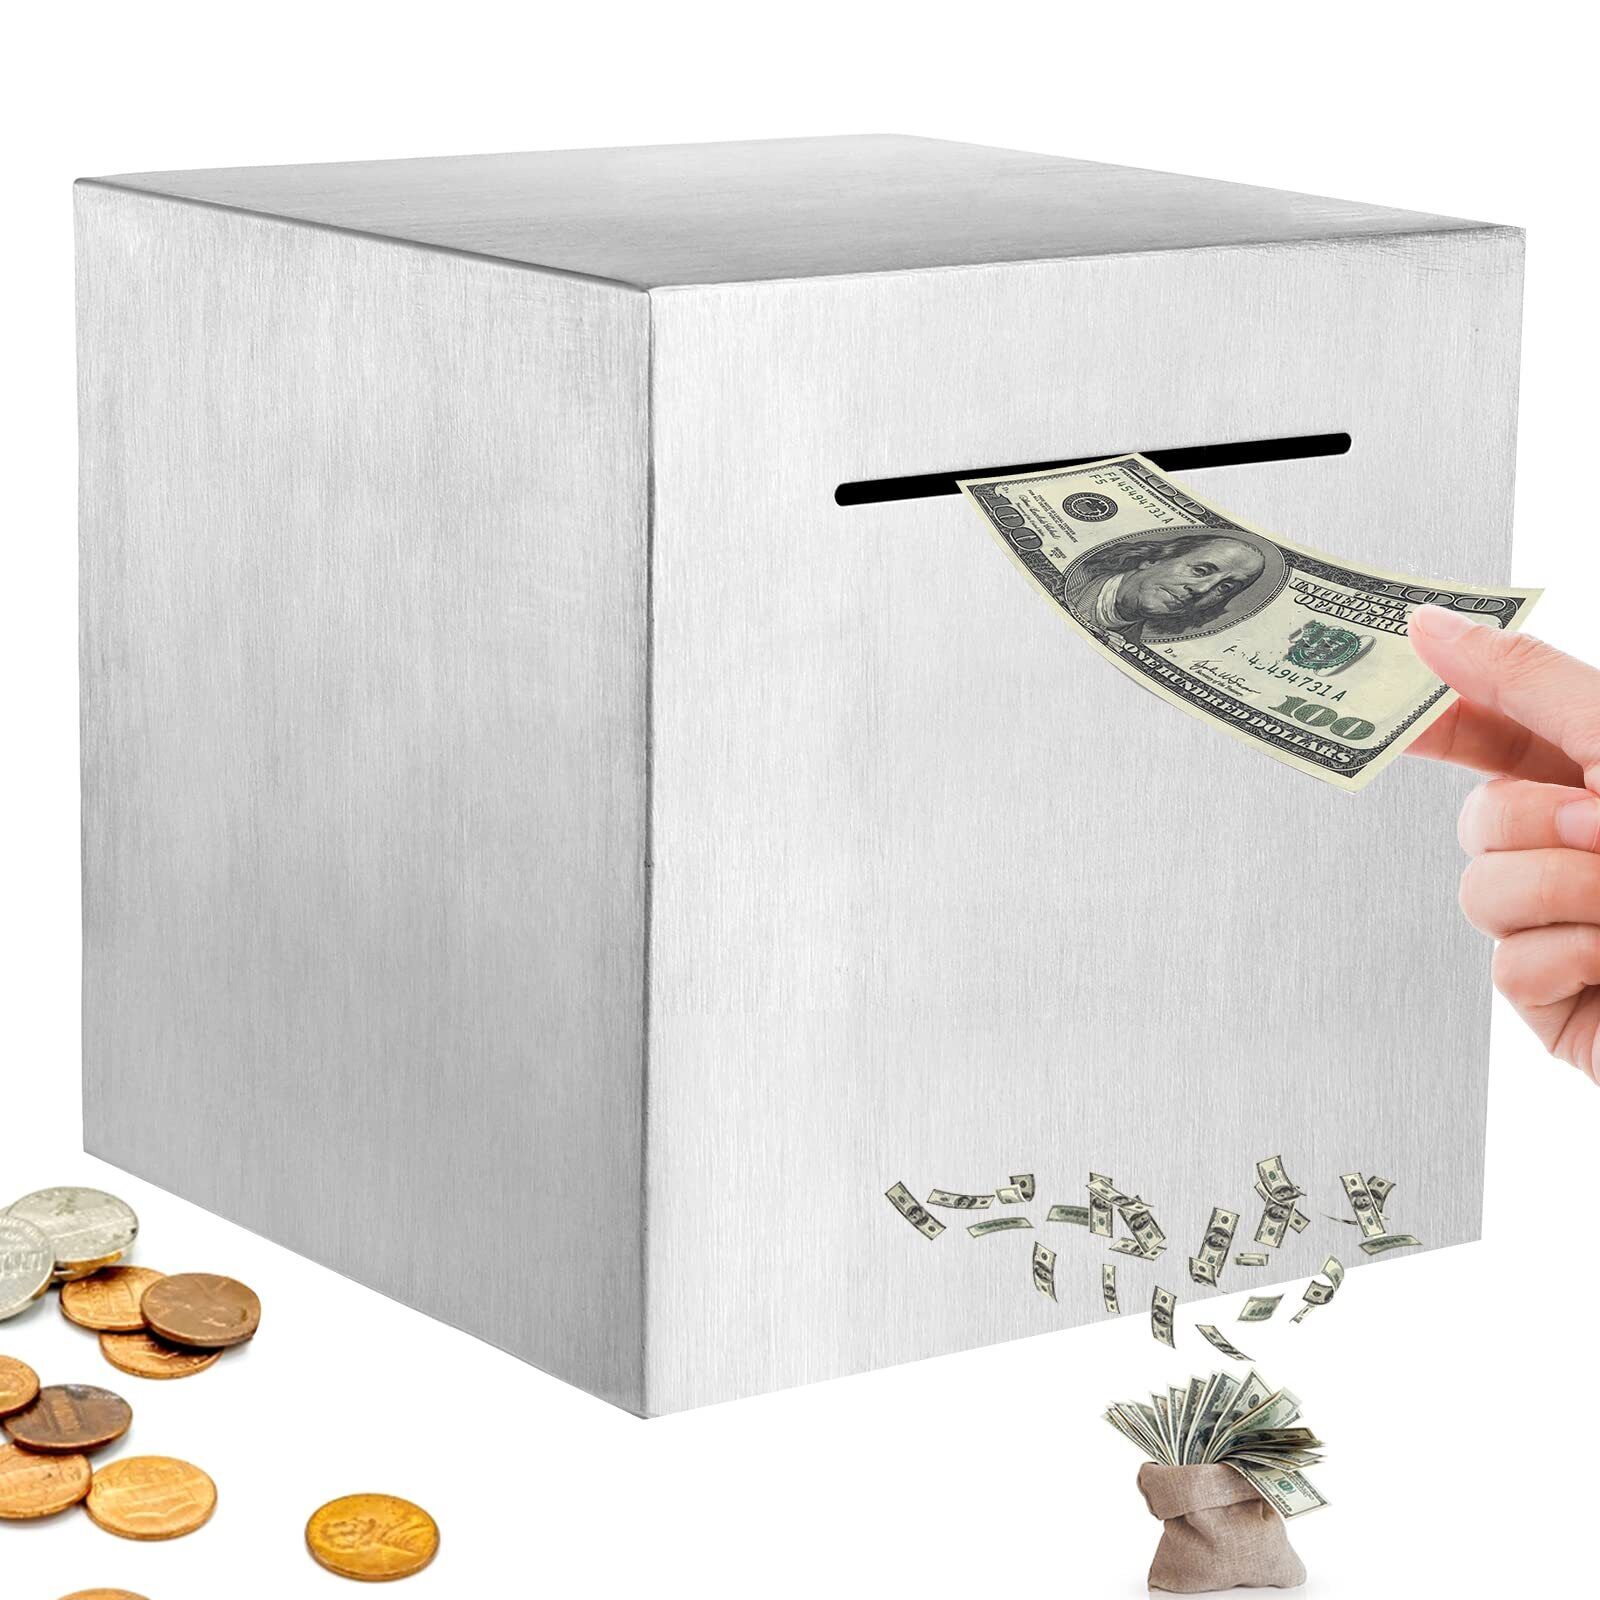 Stainless Steel Piggy Bank for Adults, Must Break To Open Money Saving Box